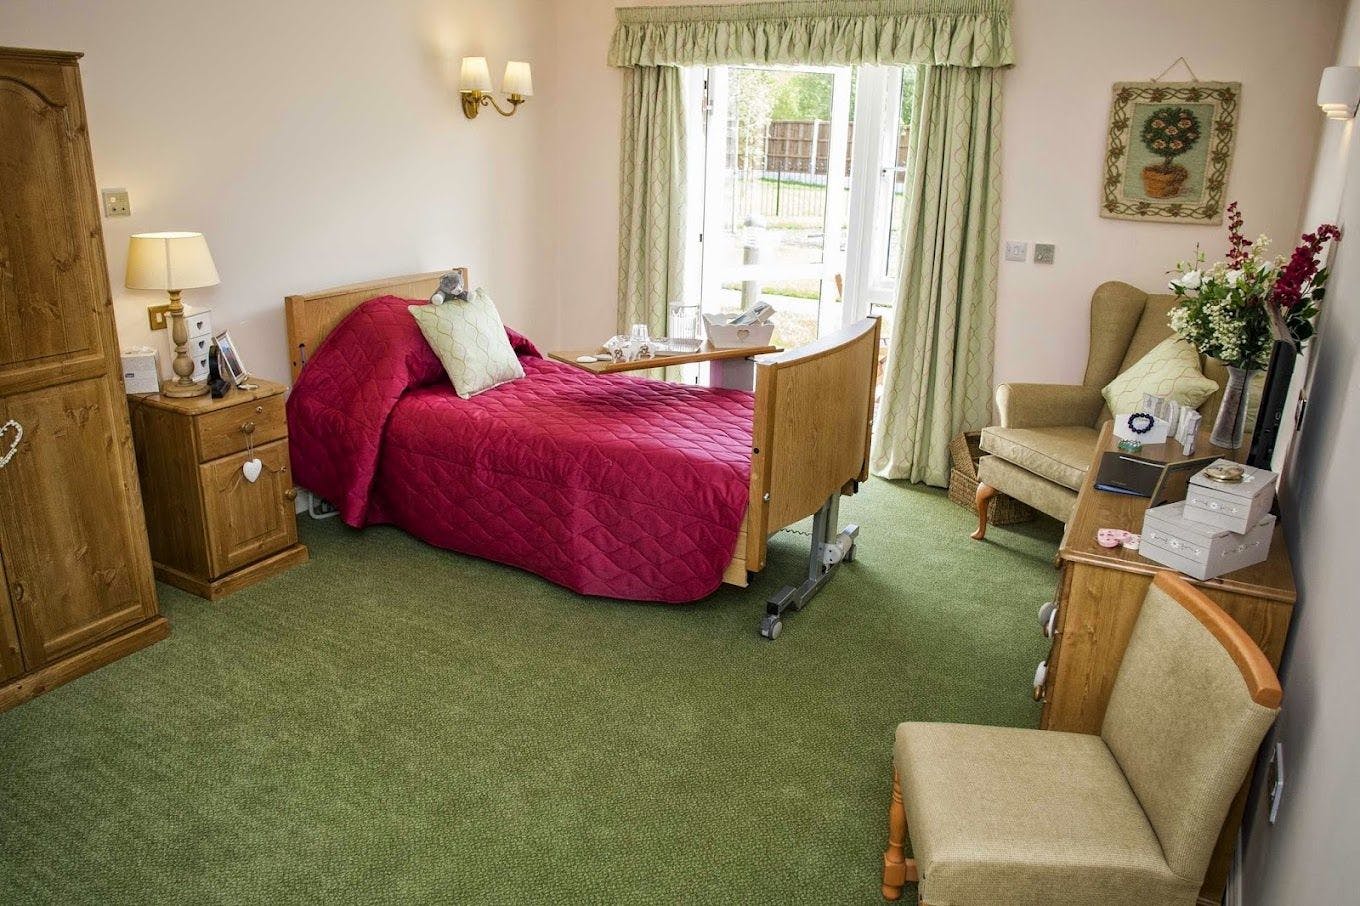 Bedroom at Sutton Grange Care Home in Southport, Merseyside